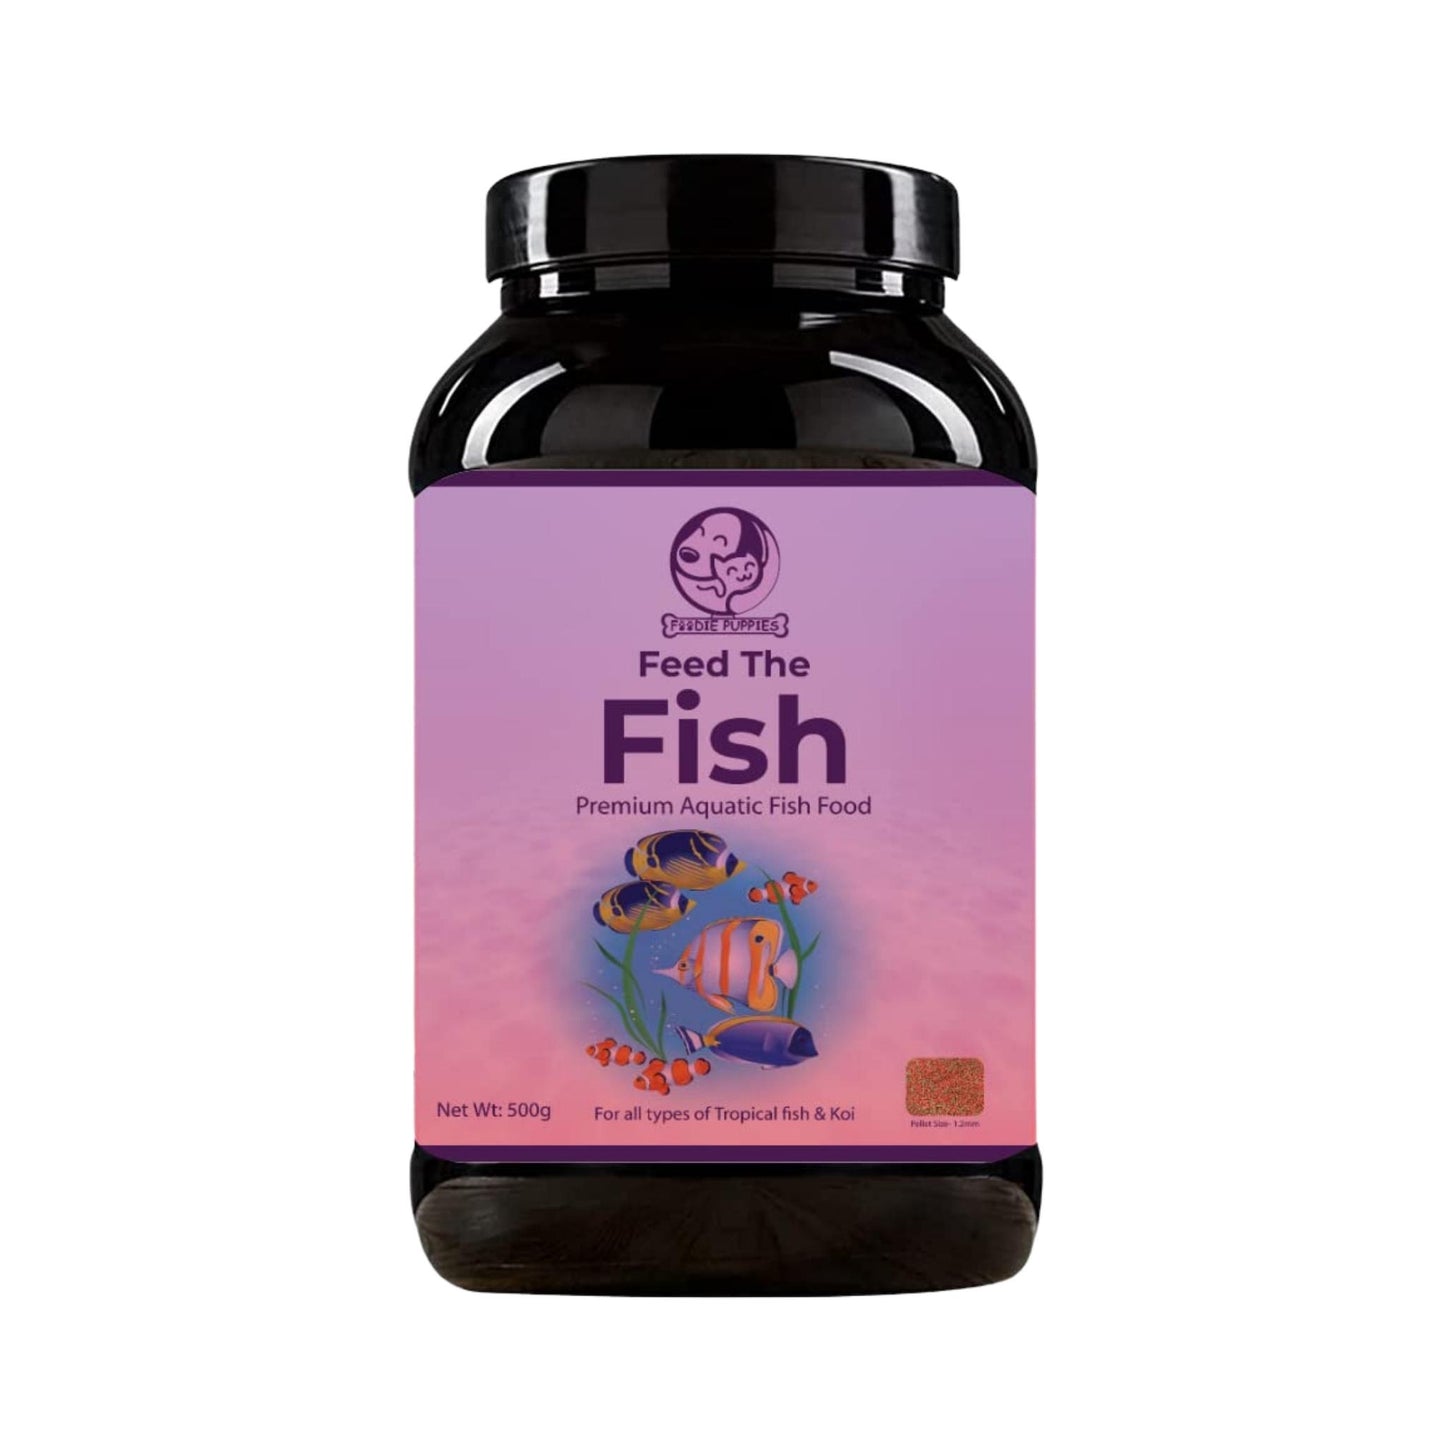 Foodie Puppies Nutritional Fish Food for Growth & Health (1.2mm, 500g)